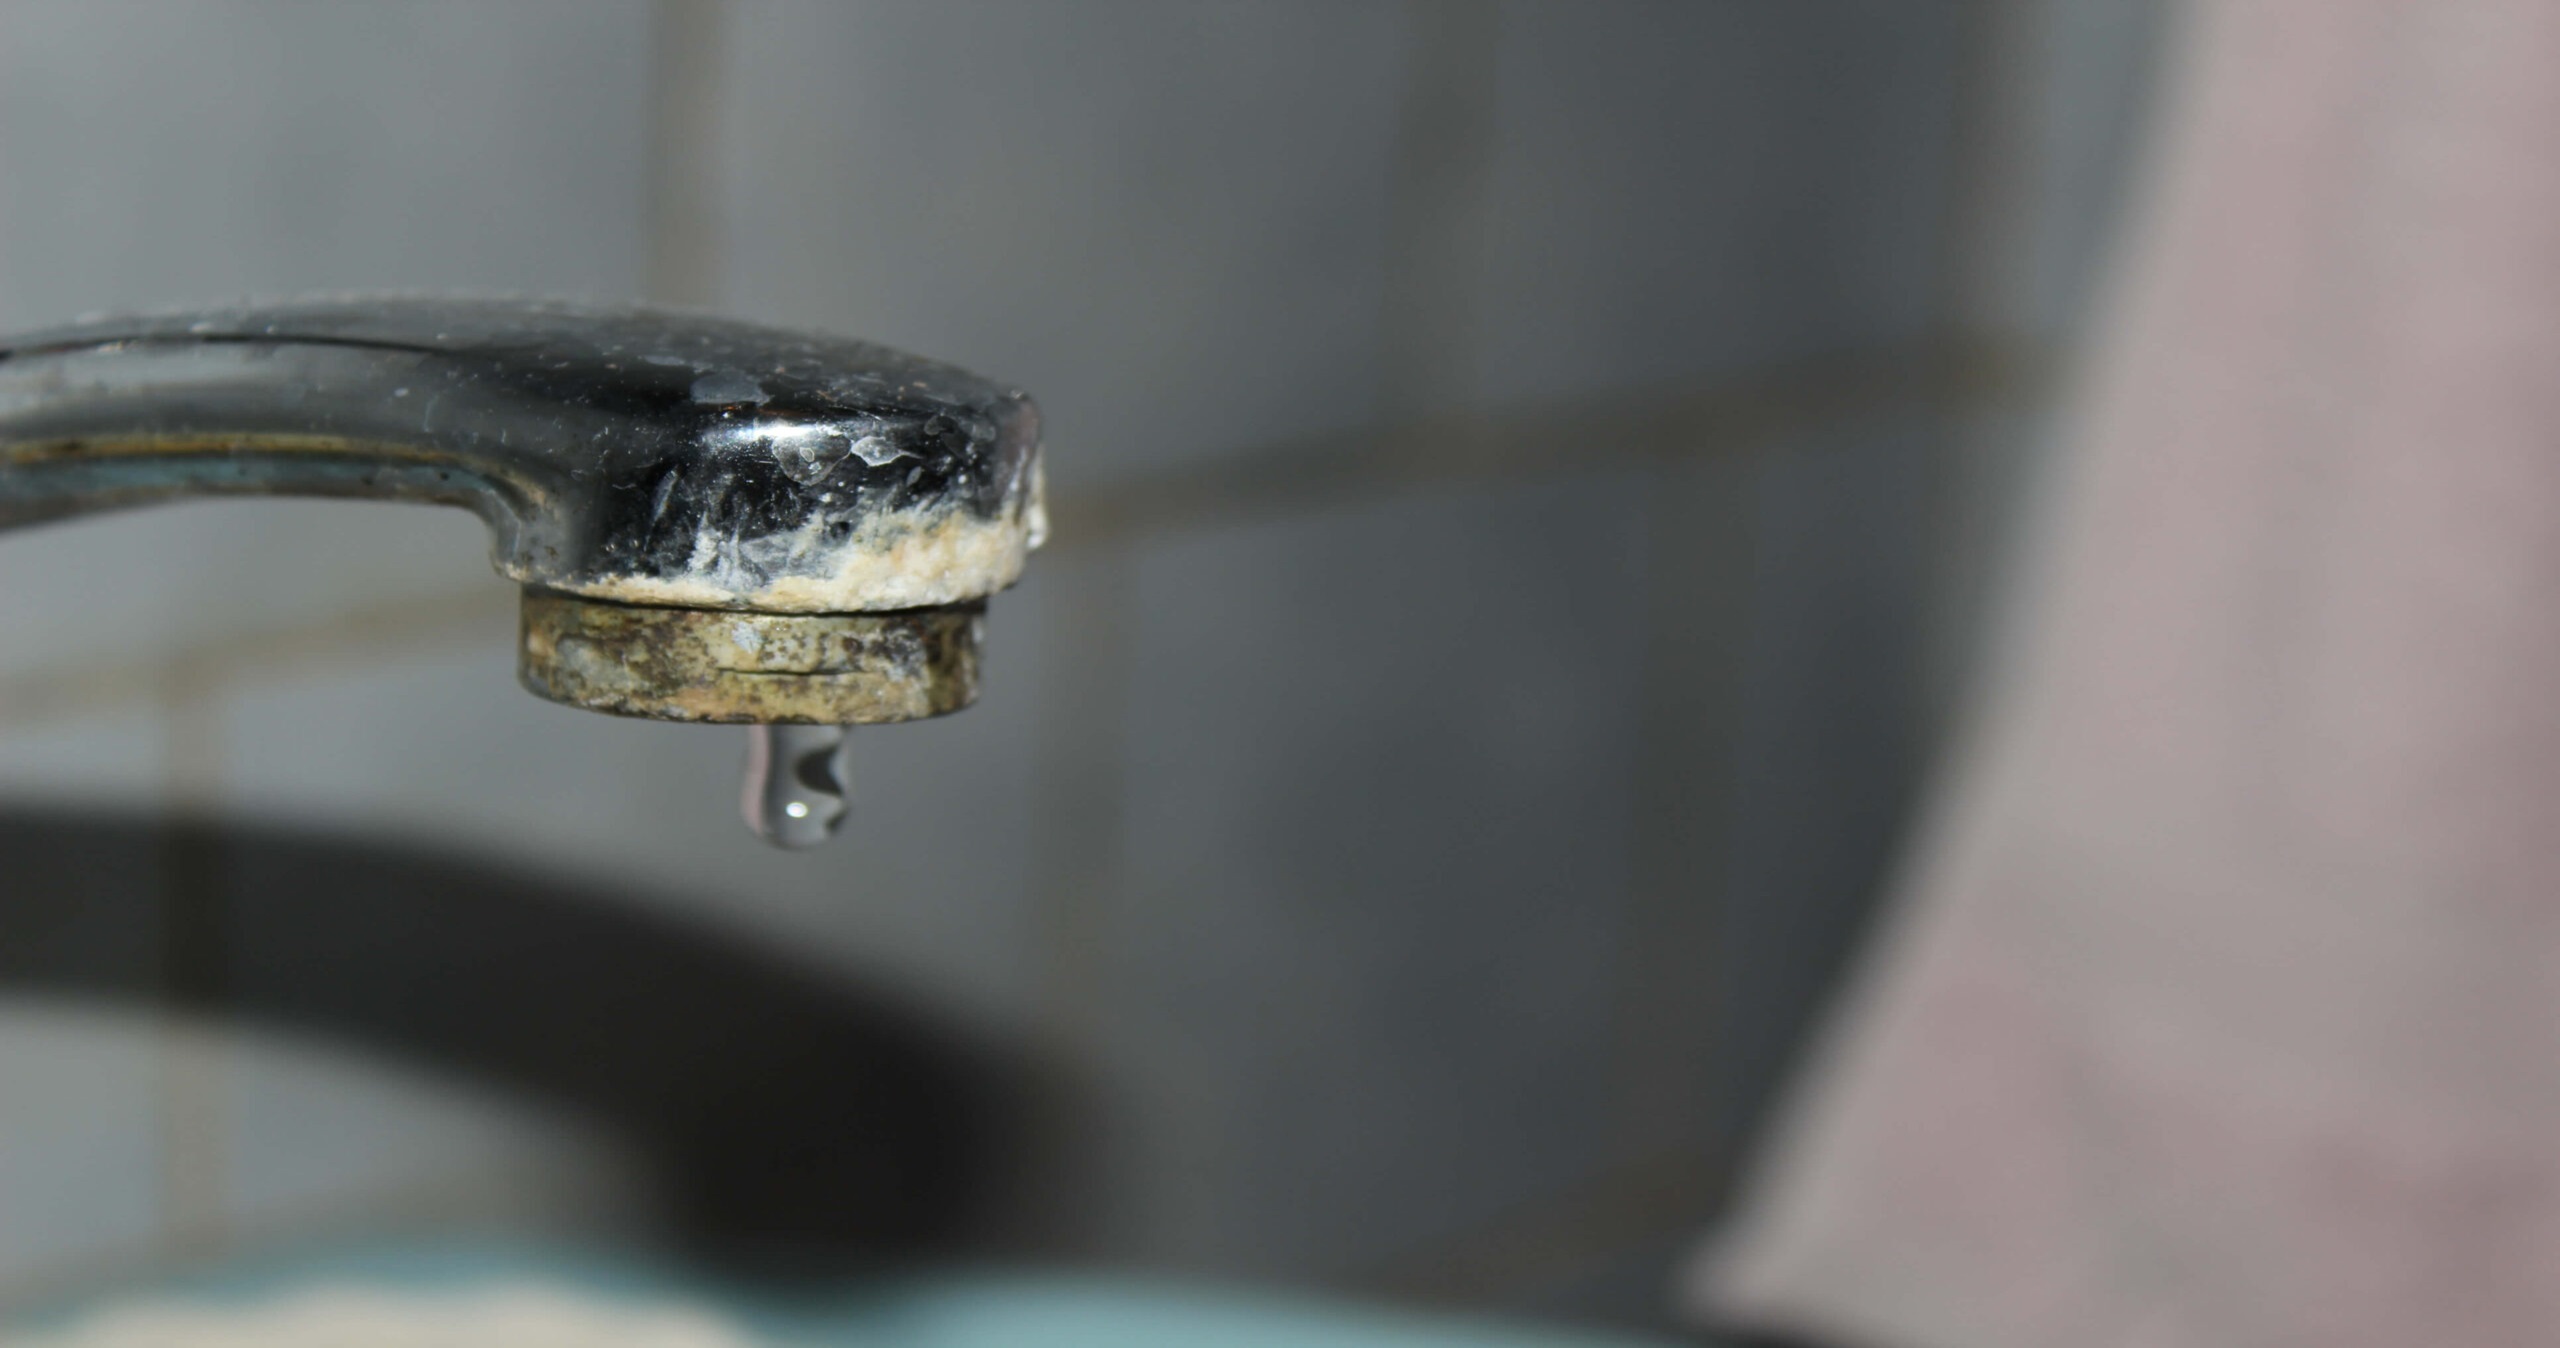 Close-up of a tap with scale buildup, demonstrating the need for anti-scale systems